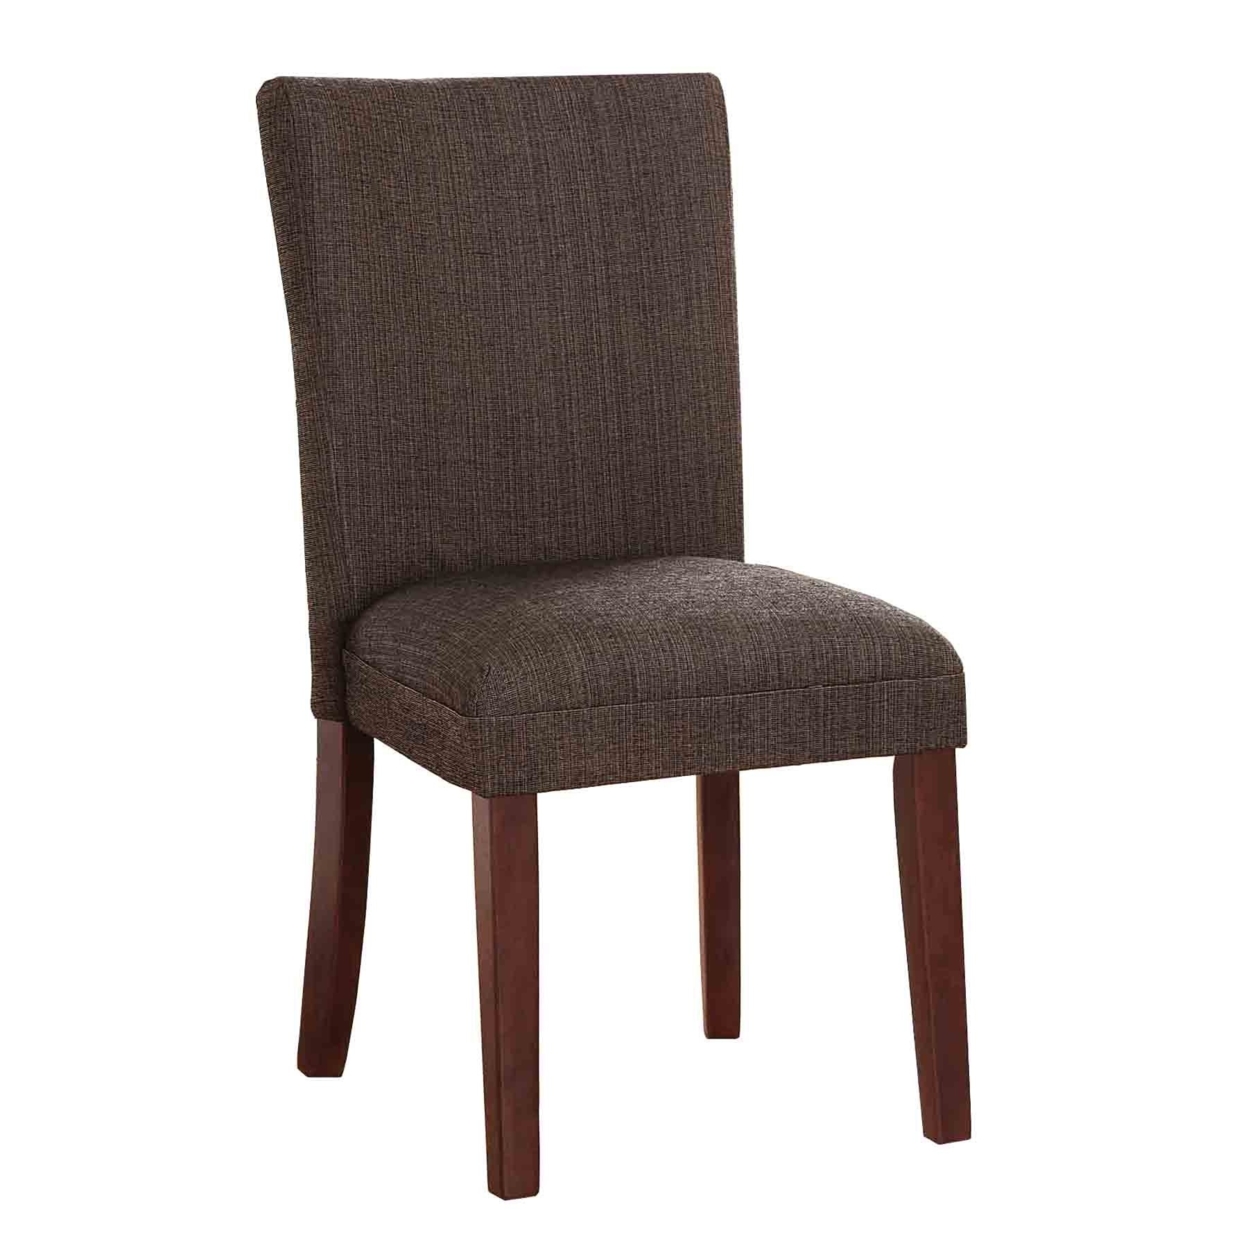 Textured Fabric Upholstered Dining Chair With Wooden Feet, Brown- Saltoro Sherpi